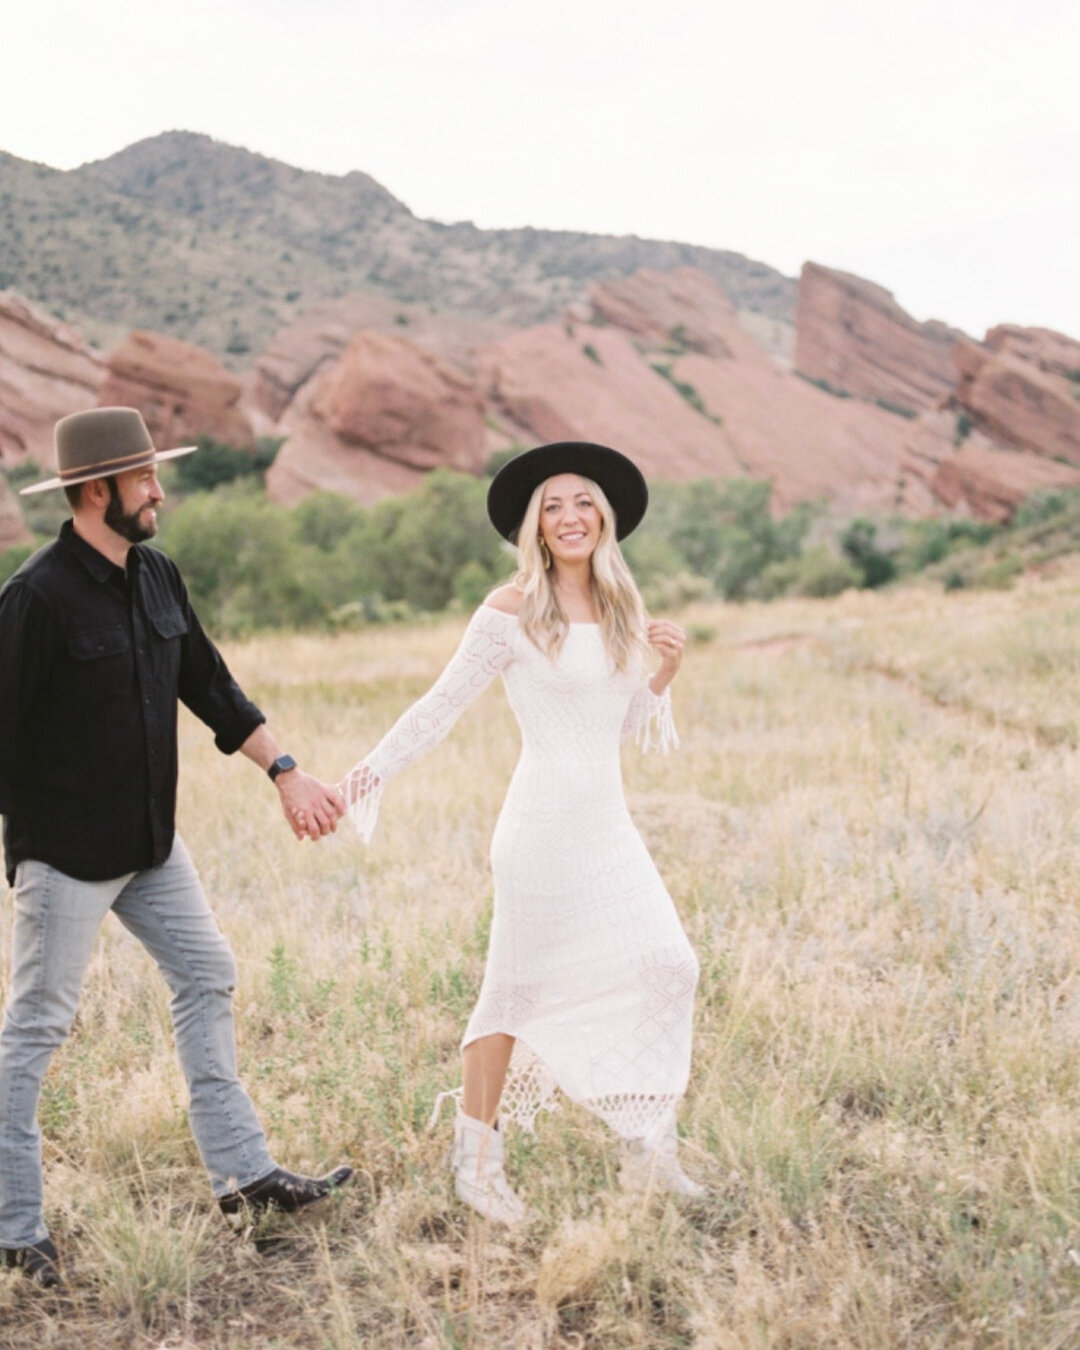 We can't wait to see Chelsea and John Henry tie the knot this weekend at Camp Lucy.  If you like the boho western vibe make sure you check our stories on Saturday!!​​​​​​​​​.
Photographer @hunterberryphotography
Couple @chelsbangs + jackhank4
.
.
.
.